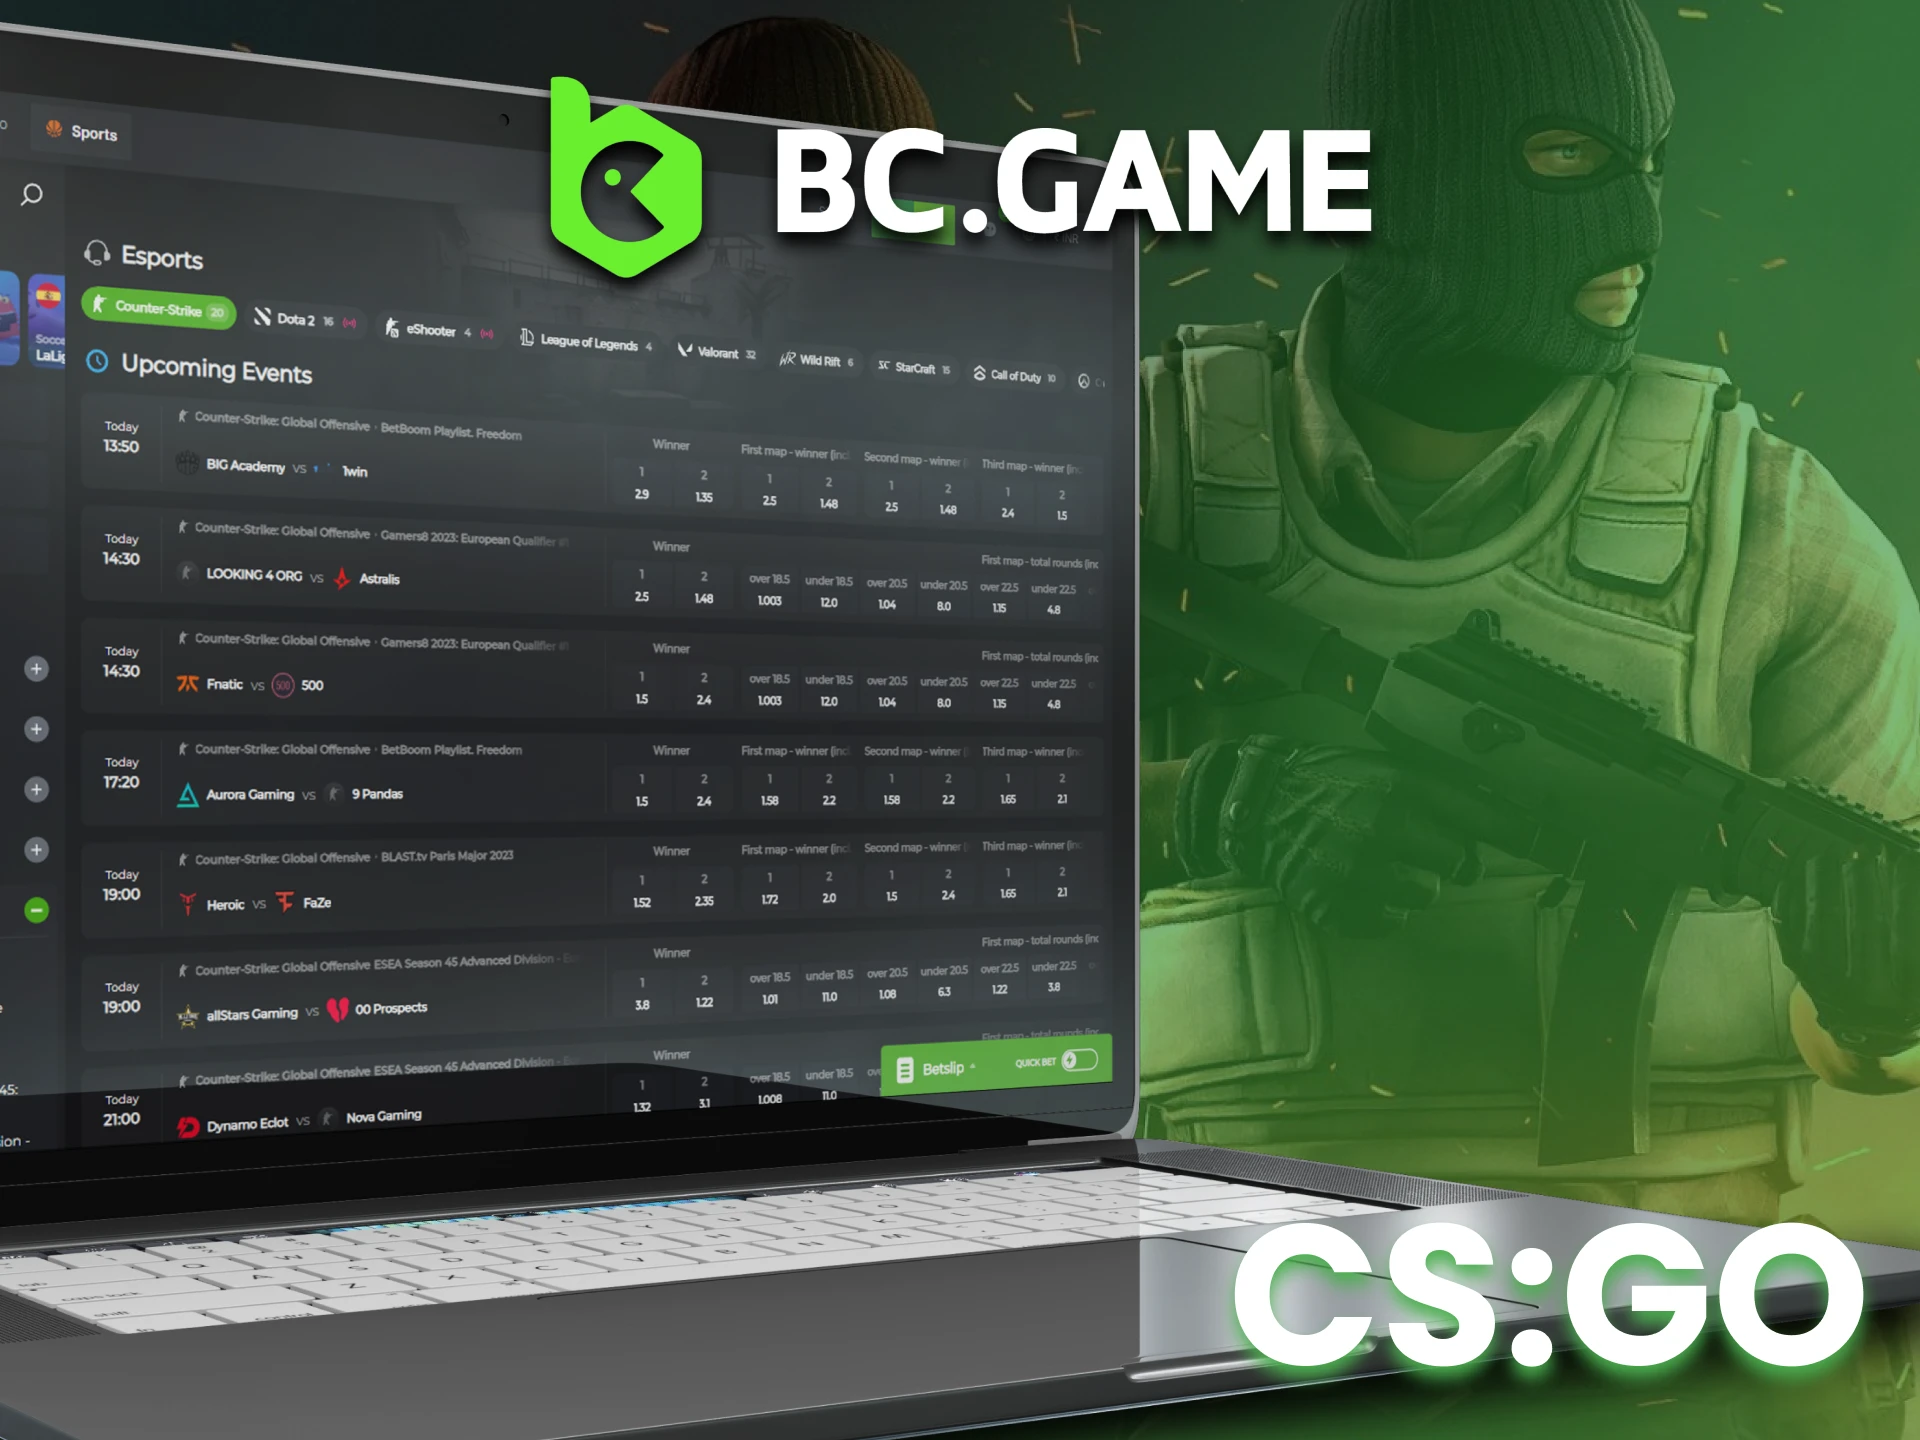 Bet on most intense esports dicipline at BC Game.